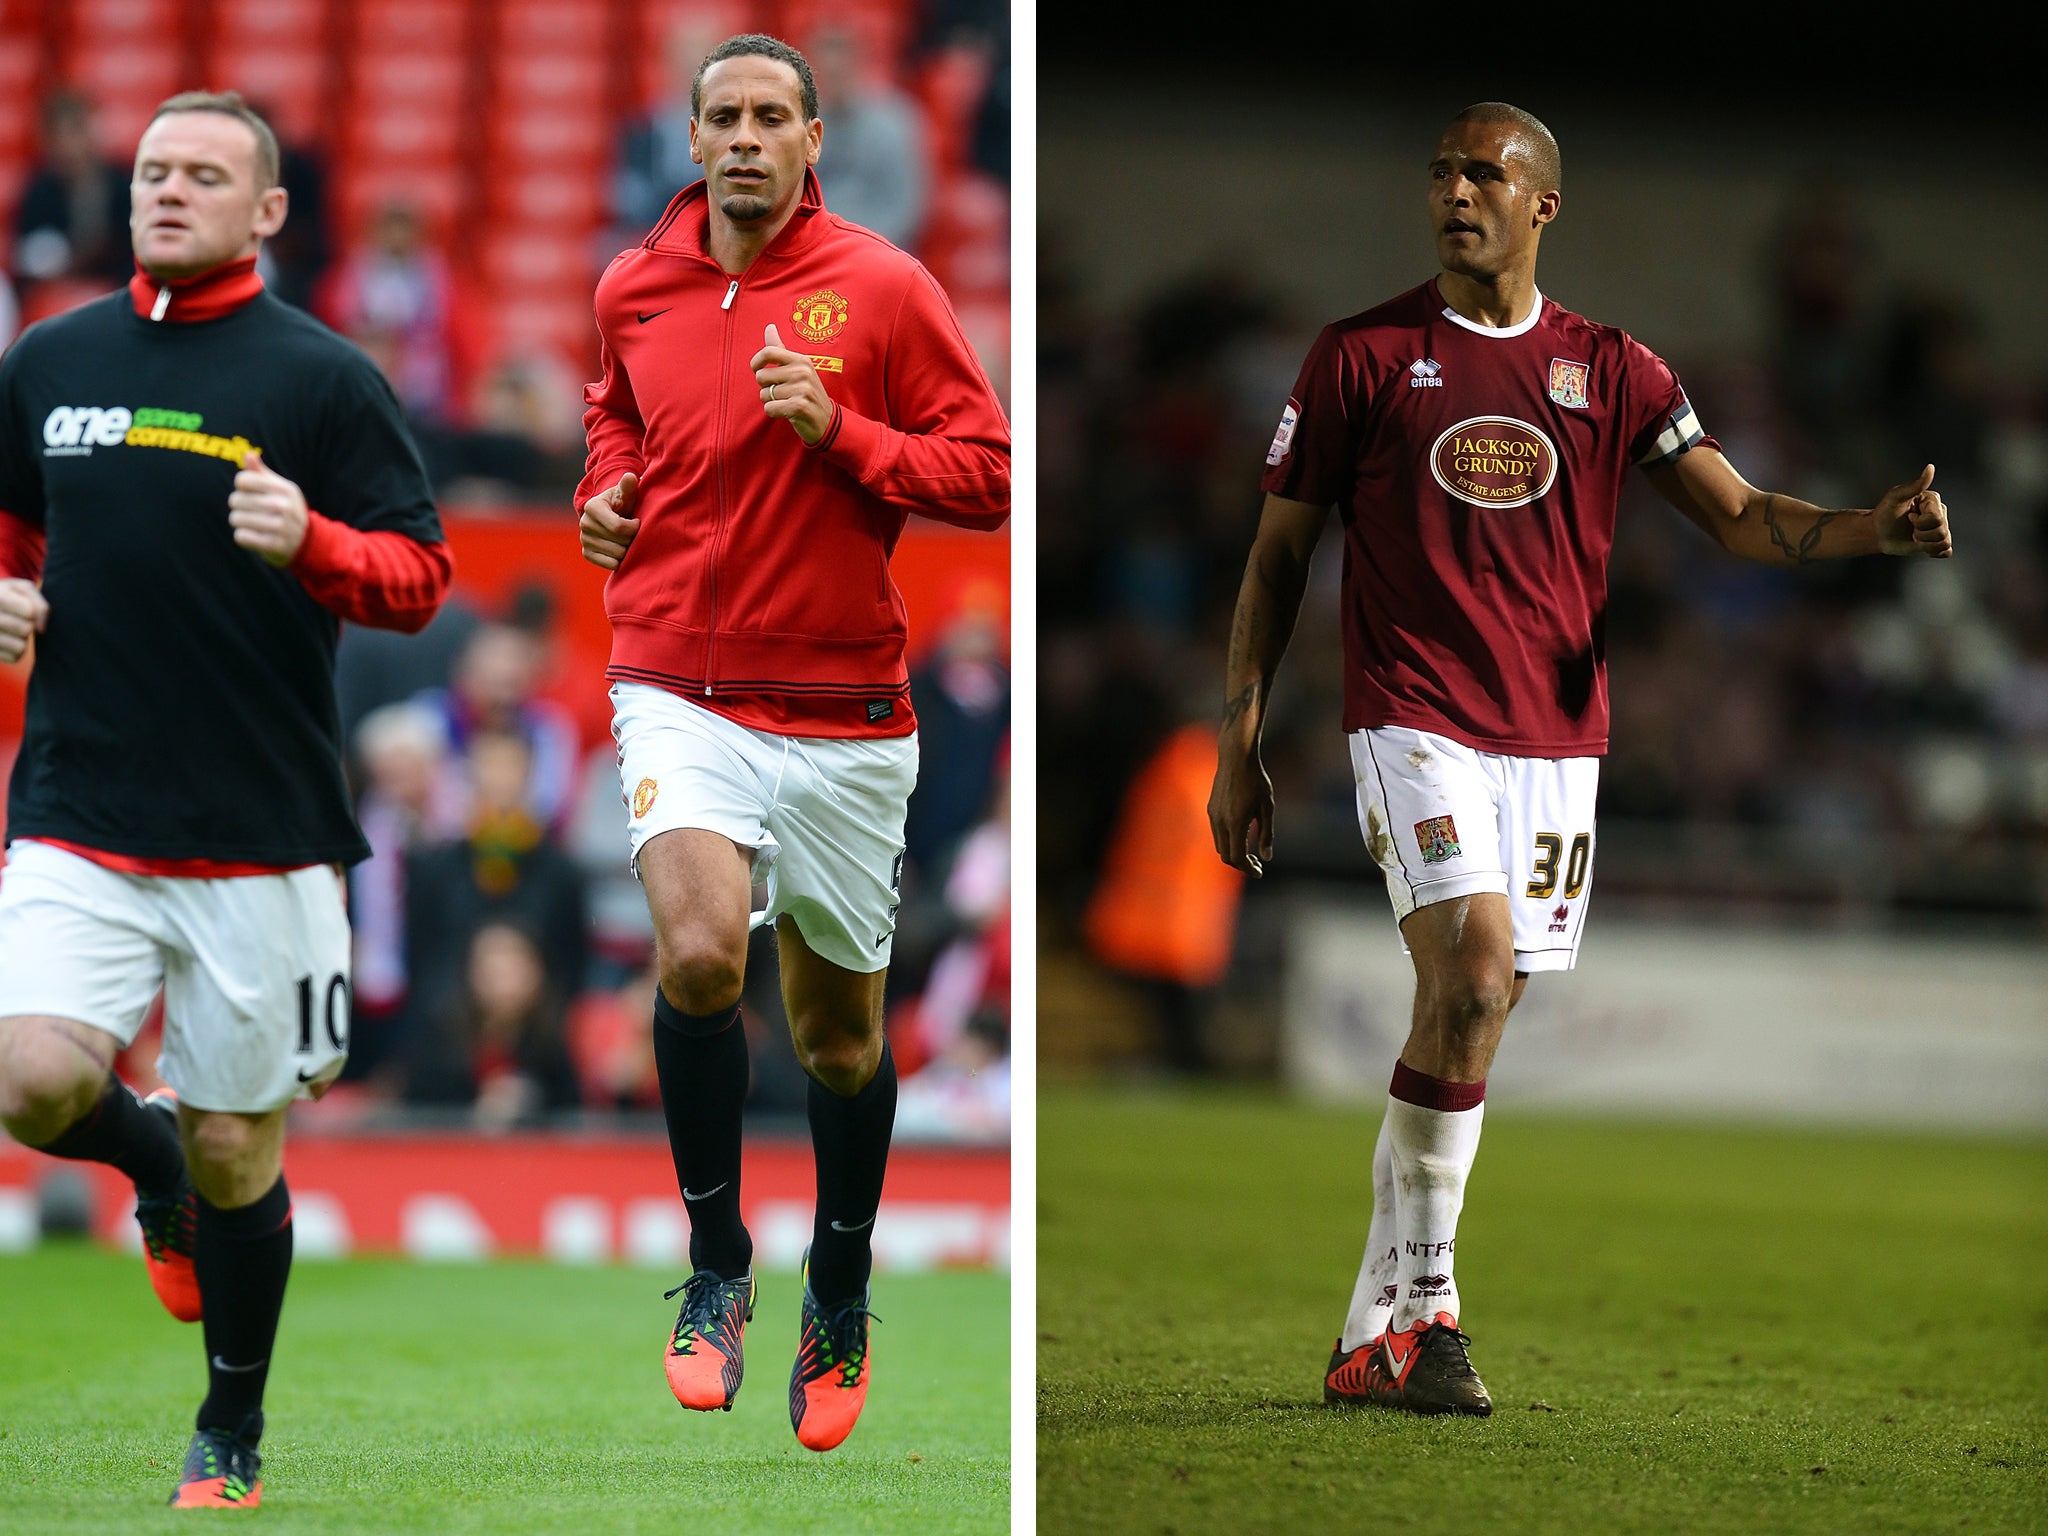 Rio Ferdinand chose not to wear the anti-racism shirt back in October 2012 before a Premier League fixture (l) and Clarke Carlisle in action for Northampton Town (r)